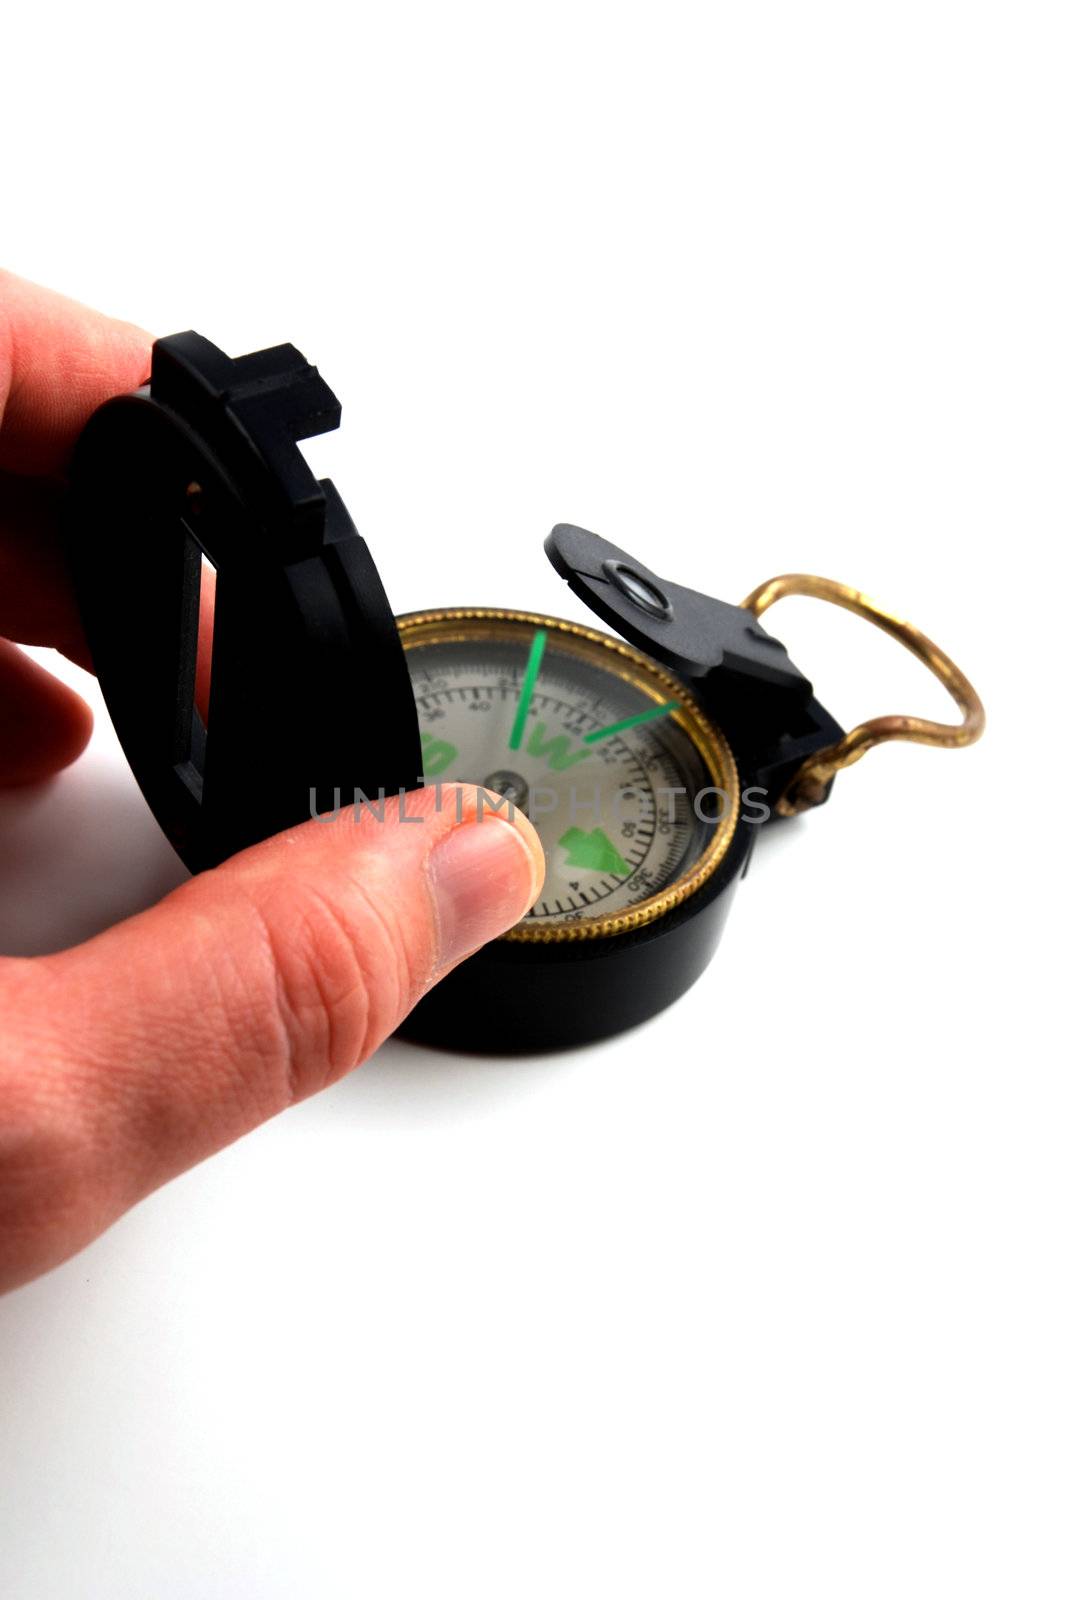 Stock pictures of a compass used for orientation for hikers and outdoor persons